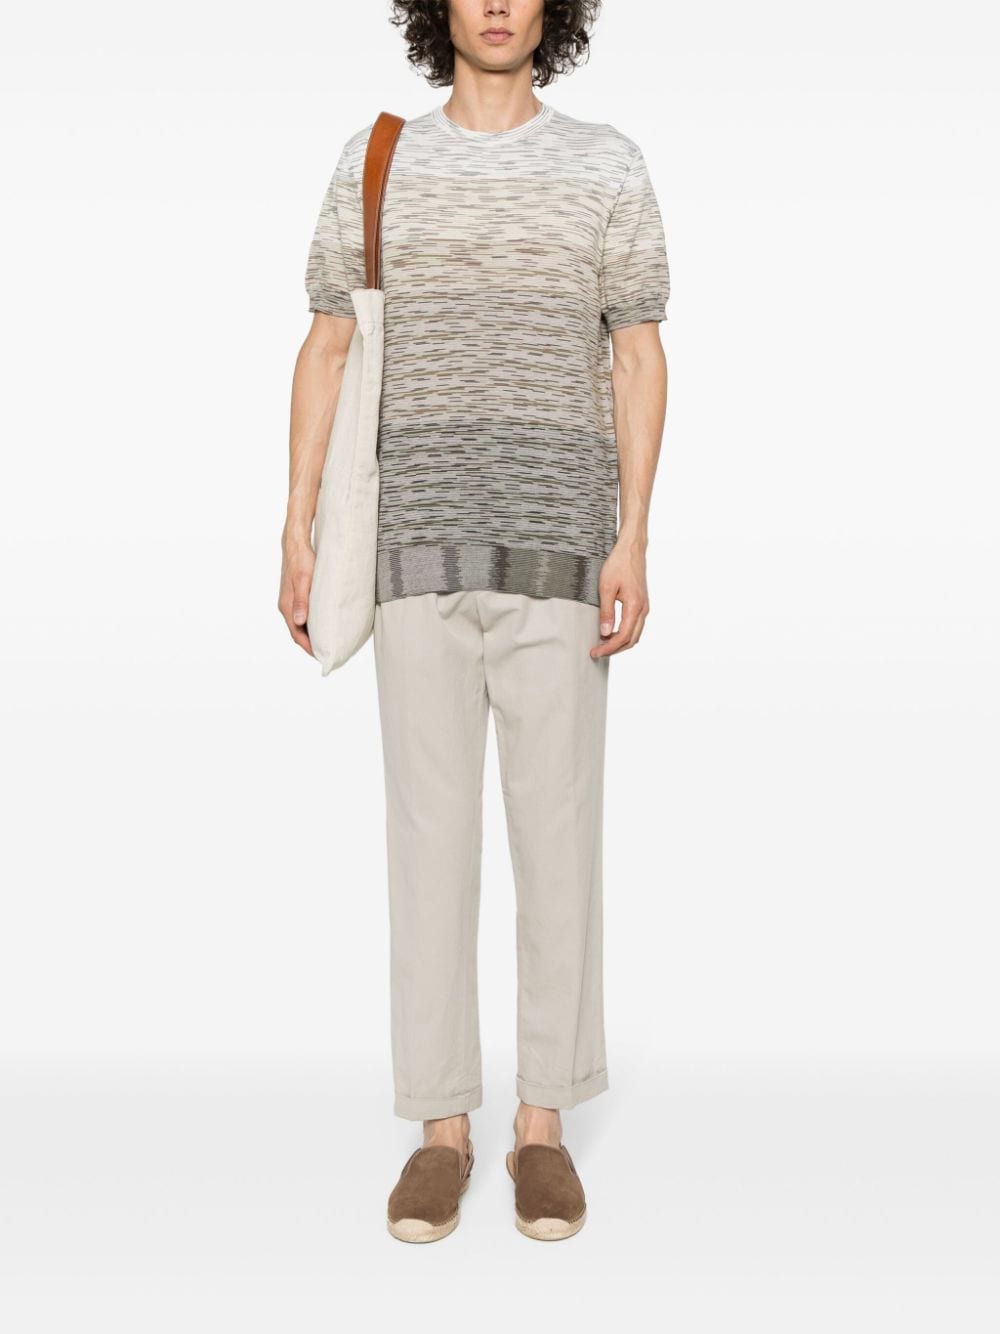 Missoni striped cotton knitted T-shirt - Beige